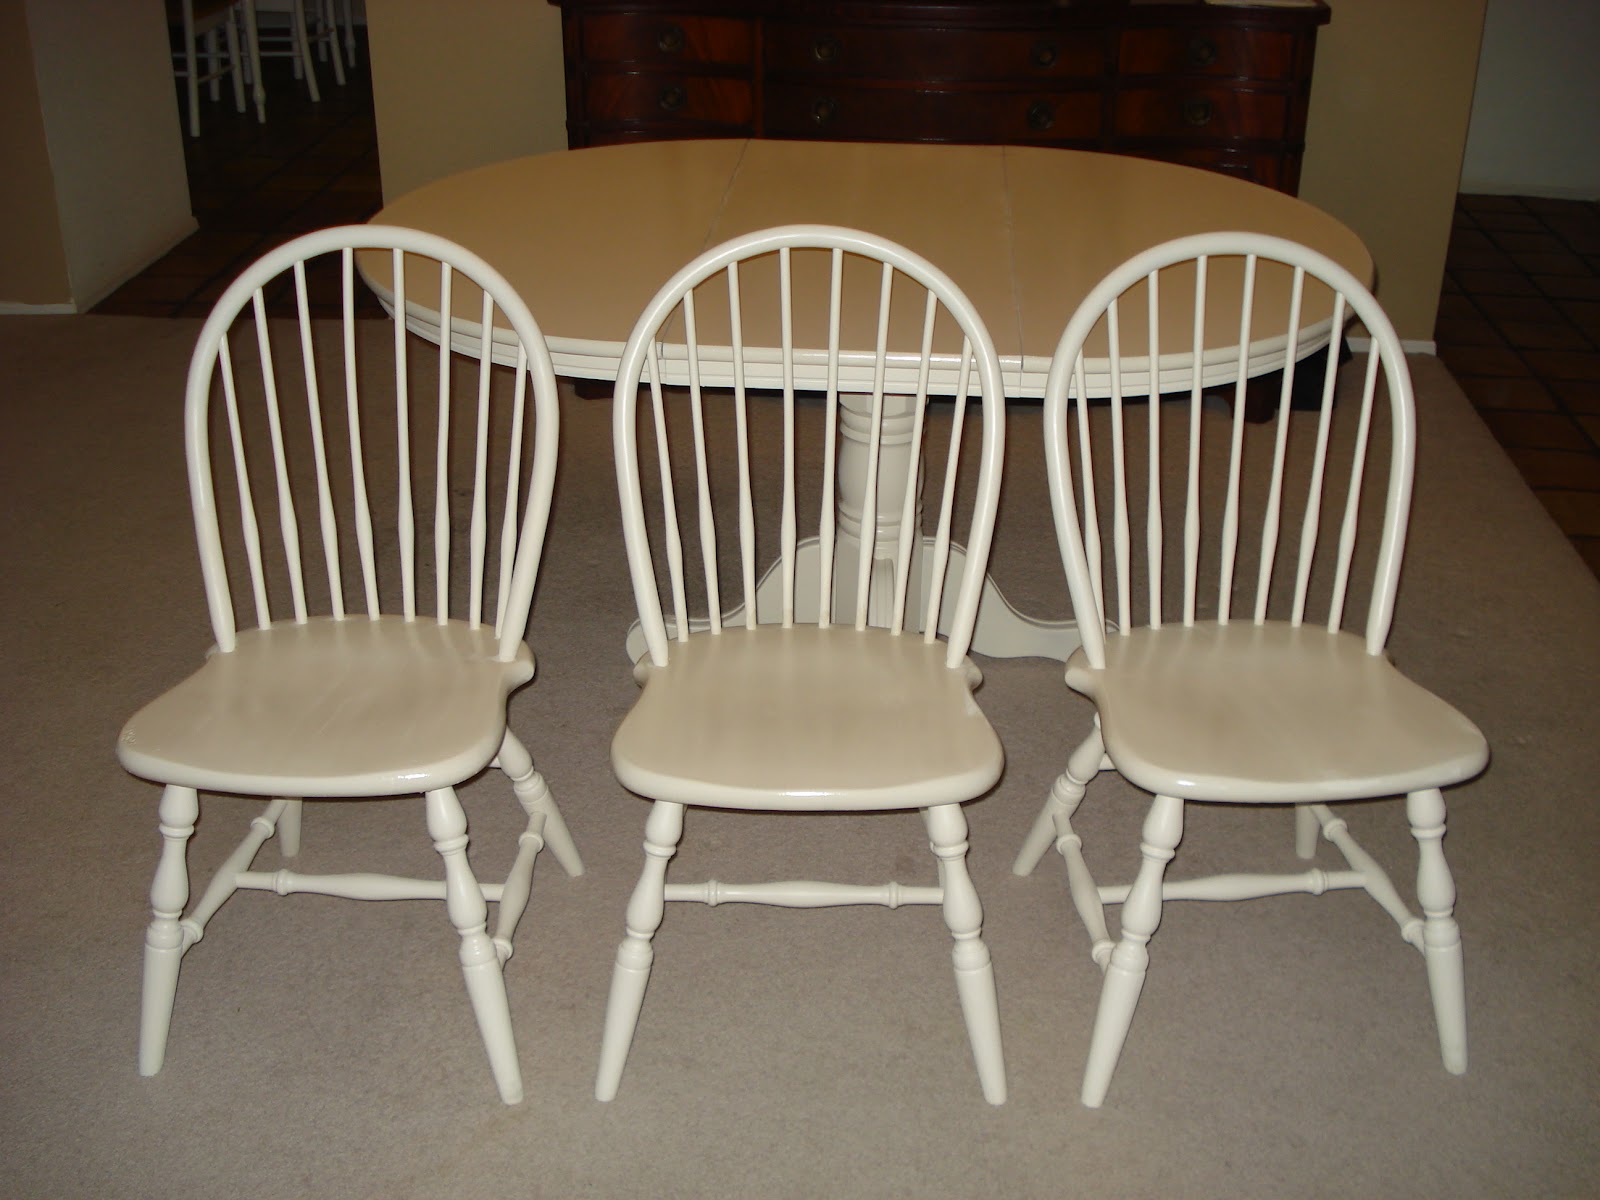 Paula's Projects: White kitchen table set repainted